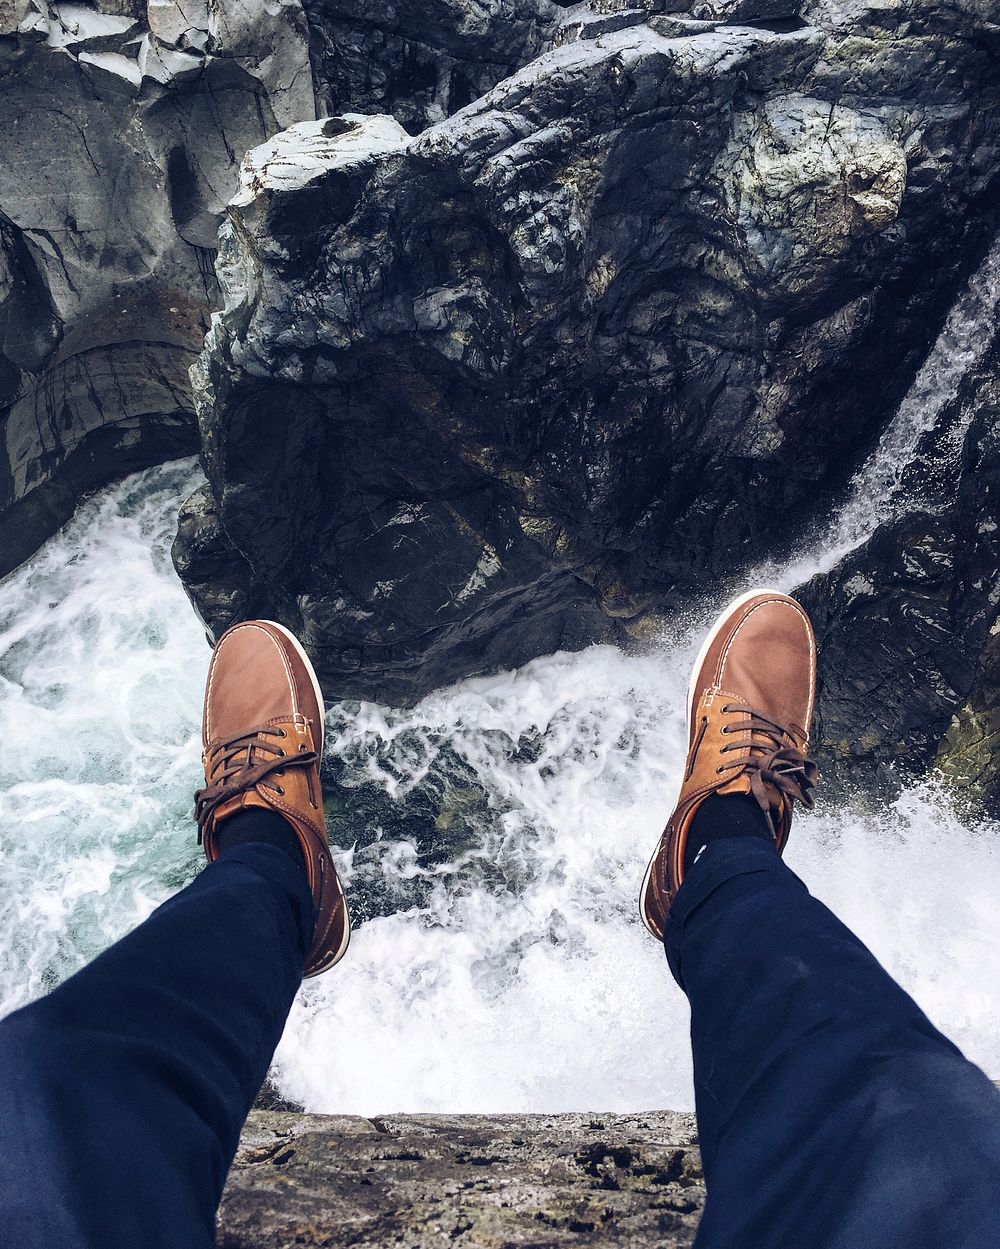 A person's feet in leather shoes dangling off a rock ledge over a fast-flowing creek. Original public domain image from…